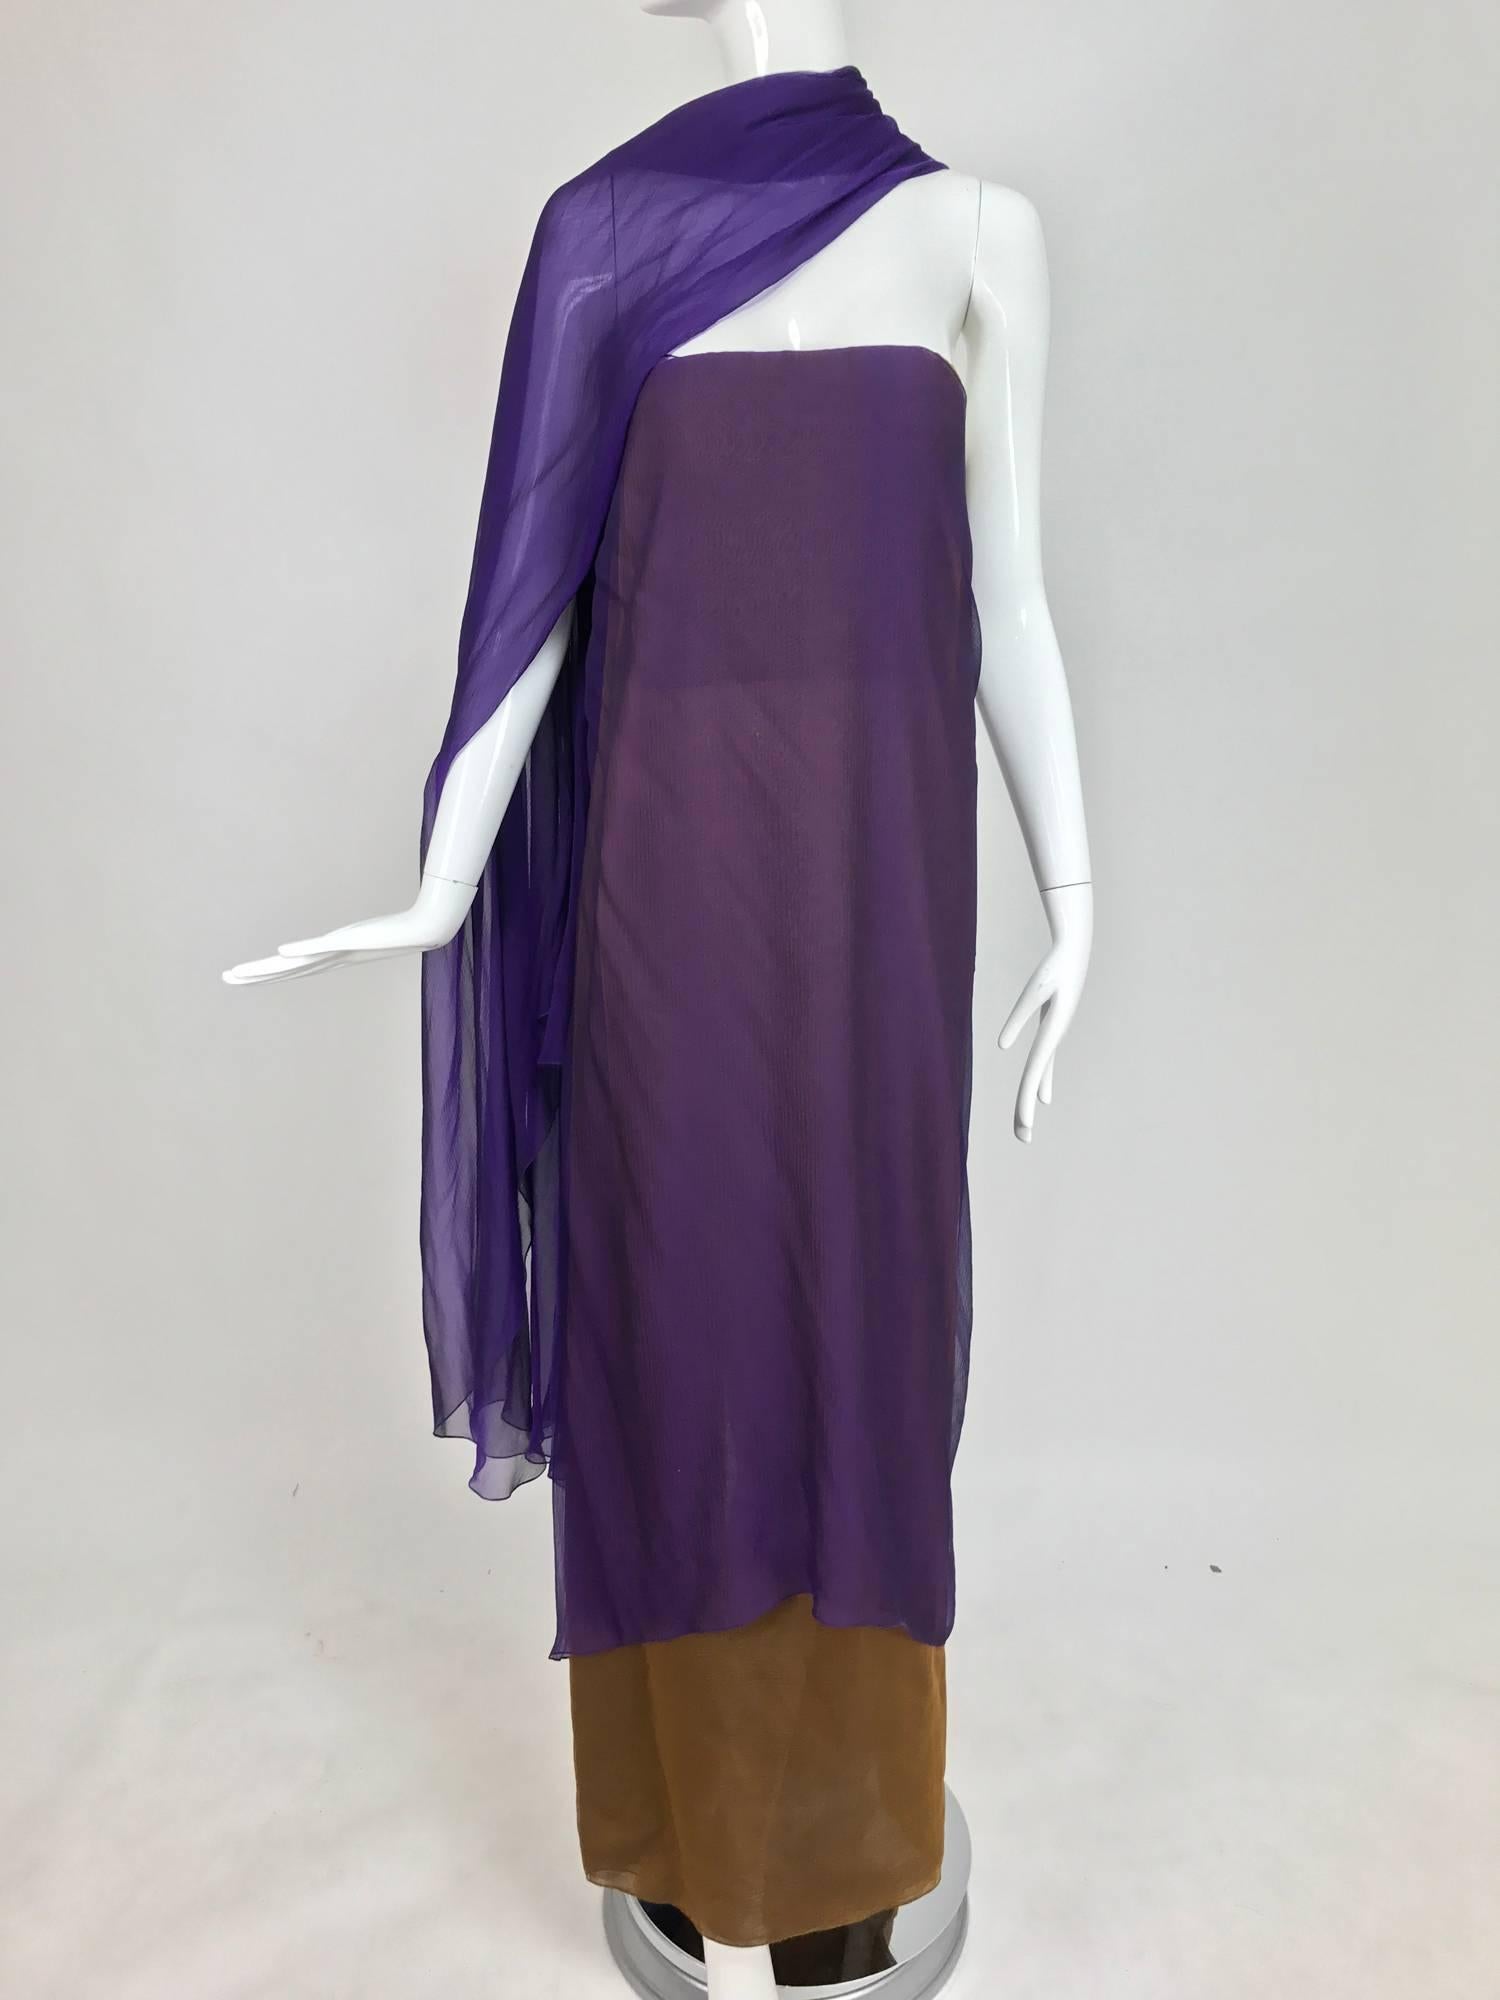 Chado Ralph Rucci silk chiffon strapless layered, draped gown with train in purple and tobacco brown. Three layers of iridescent silk chiffon, the strapless column gown has a deep center back hem vent, attached at the back is a long purple silk